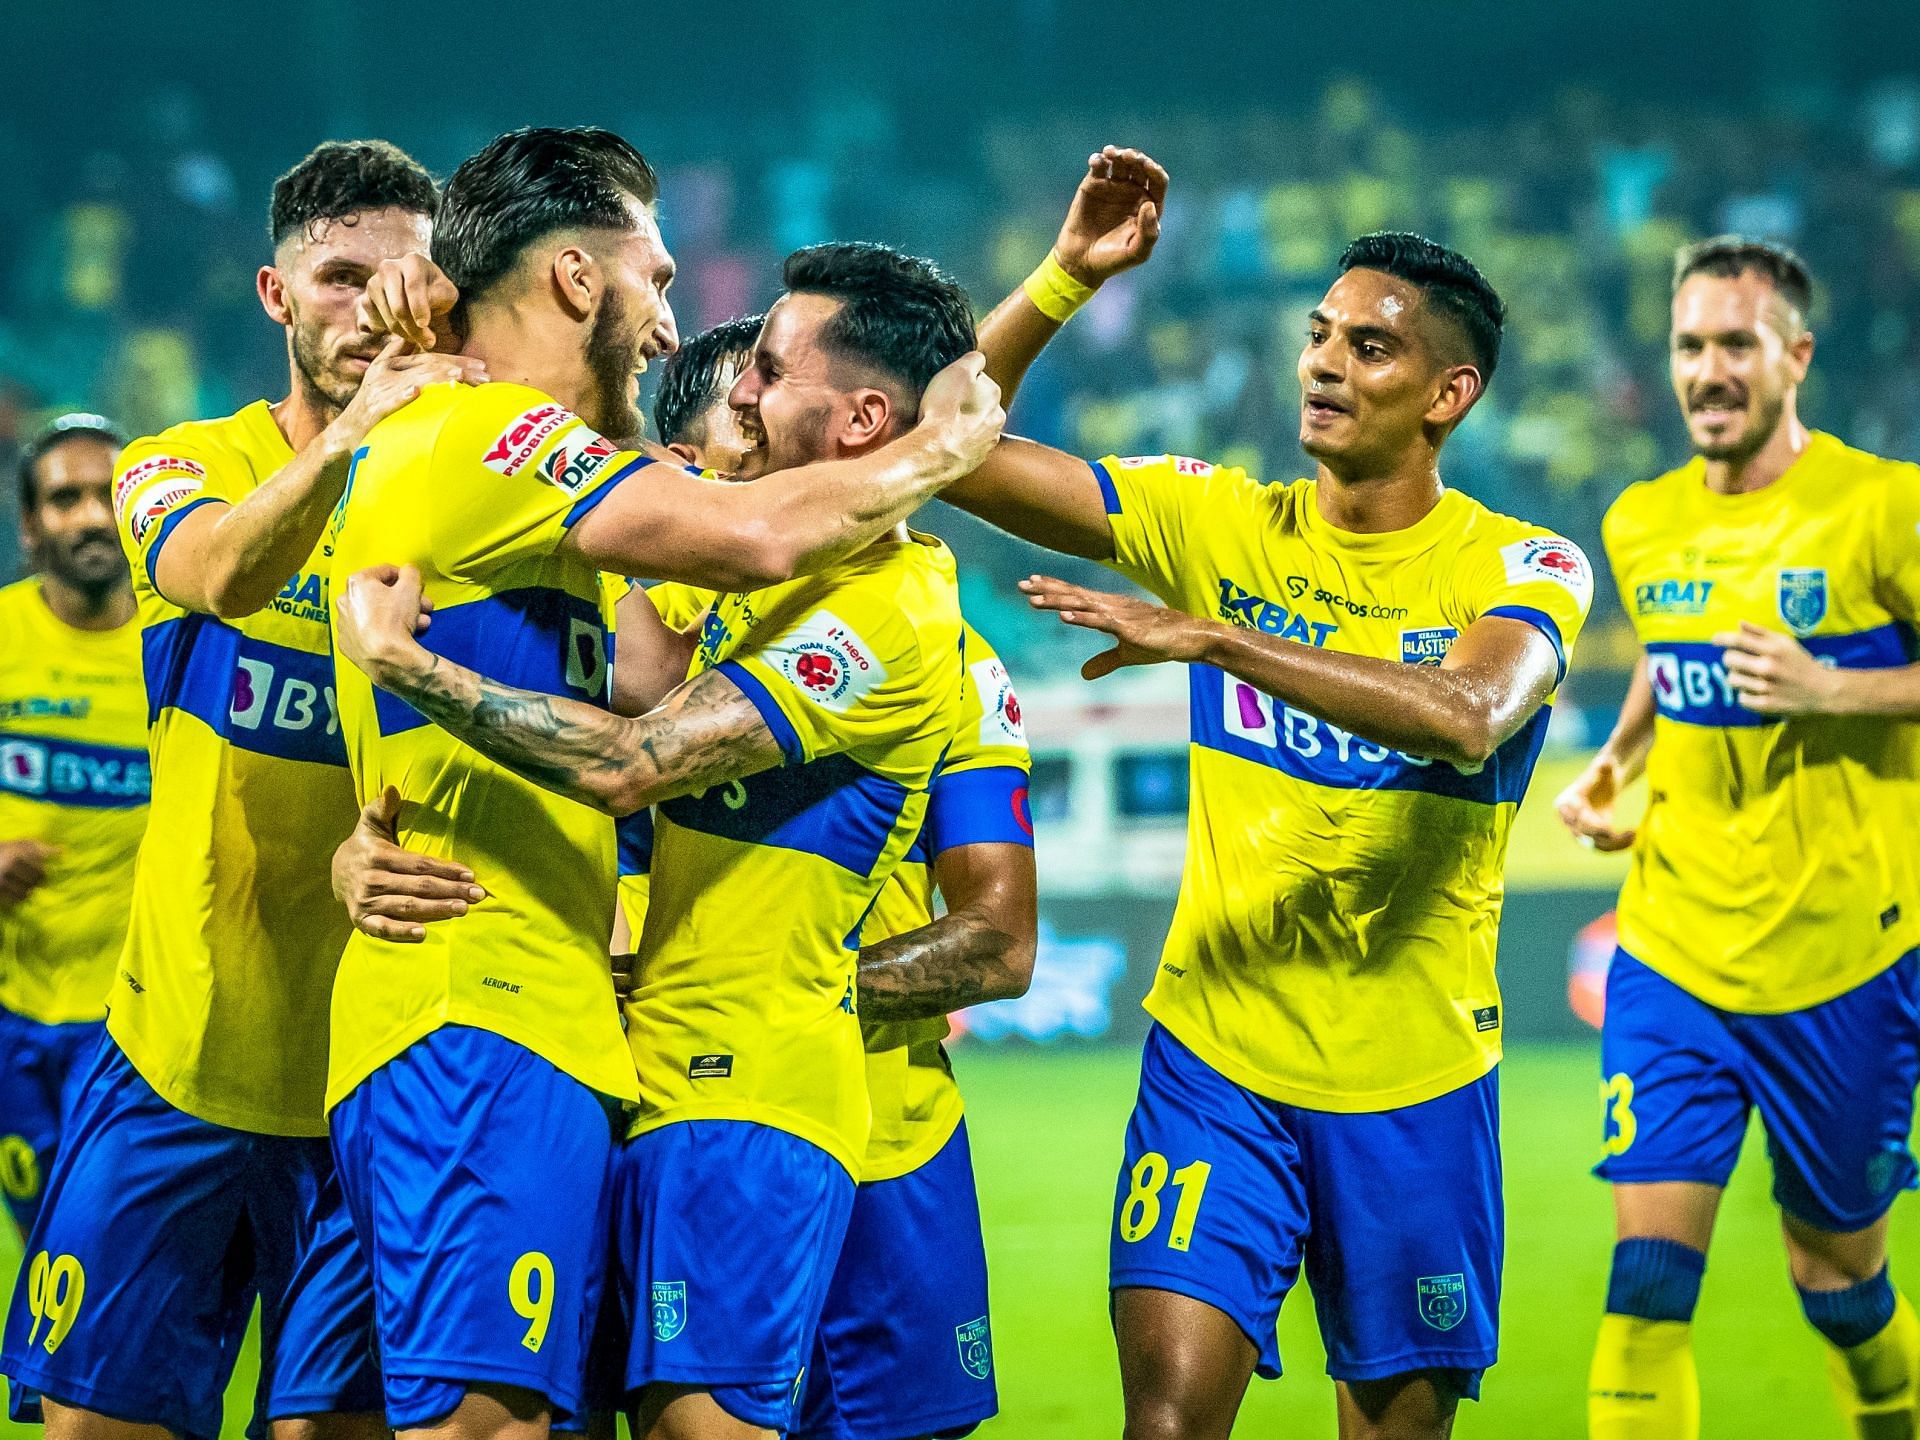 Can the Blasters go one step closer to sealing qualification with a win in this game? (Image Courtesy: Kerala Blasters FC Twitter)